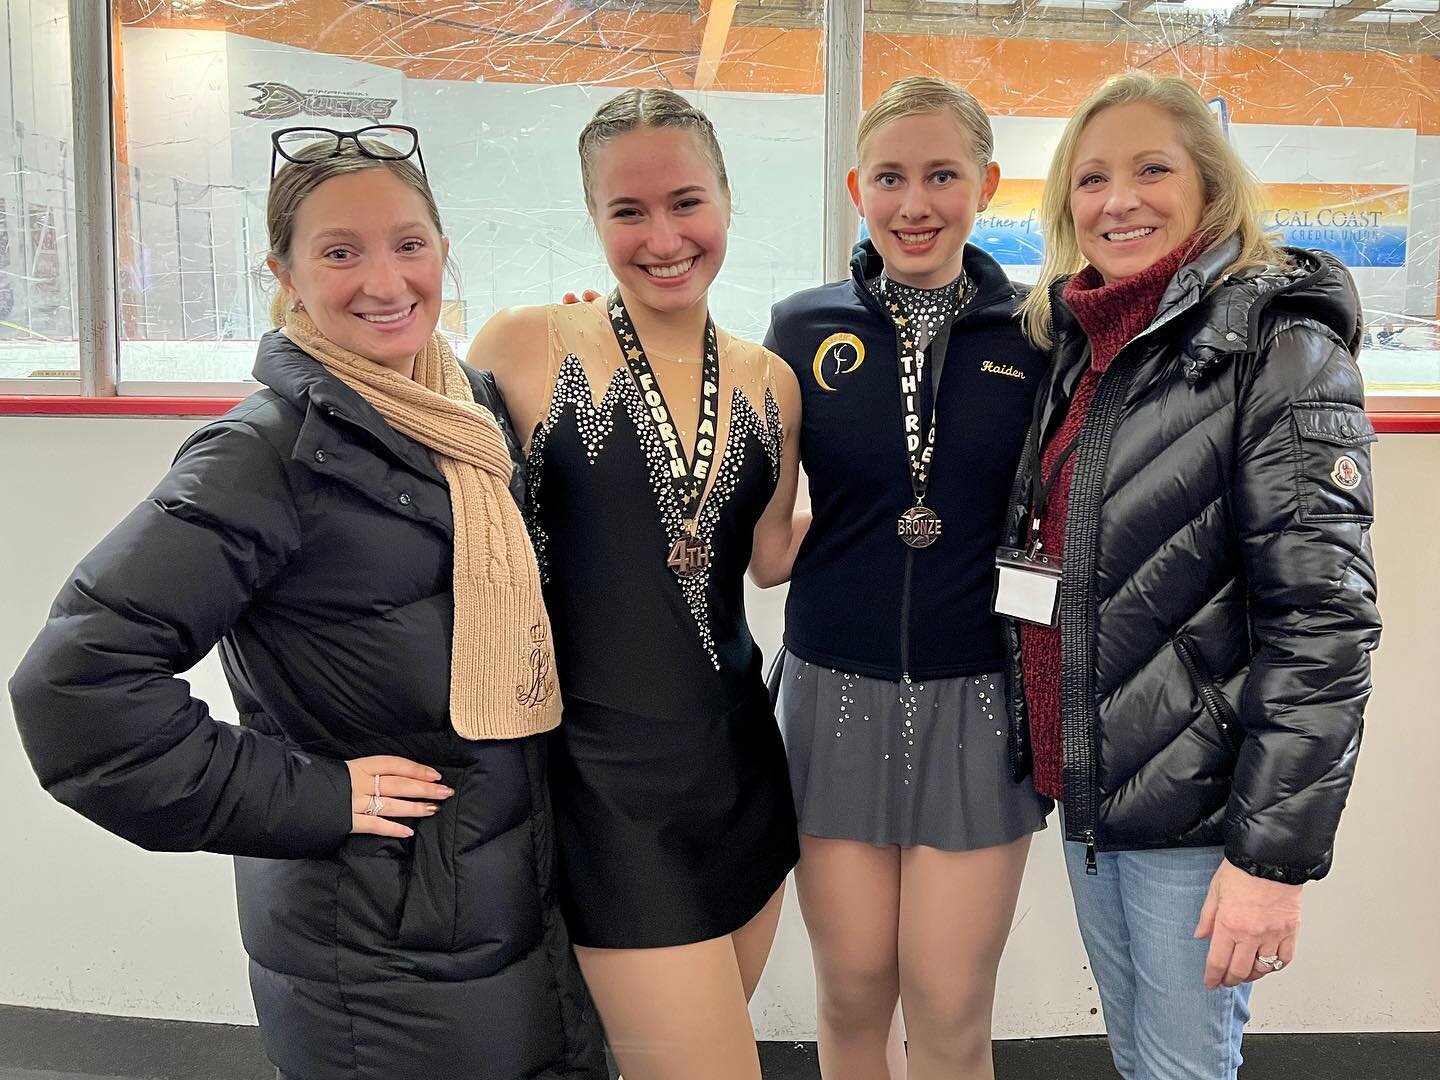 So proud of our skaters that competed this weekend in the San Diego Sweetheart Classic at Poway Ice! What a great way to start at our first competition of 2023! Special Congratulations goes to Arisa for landing her first double flip in competition an